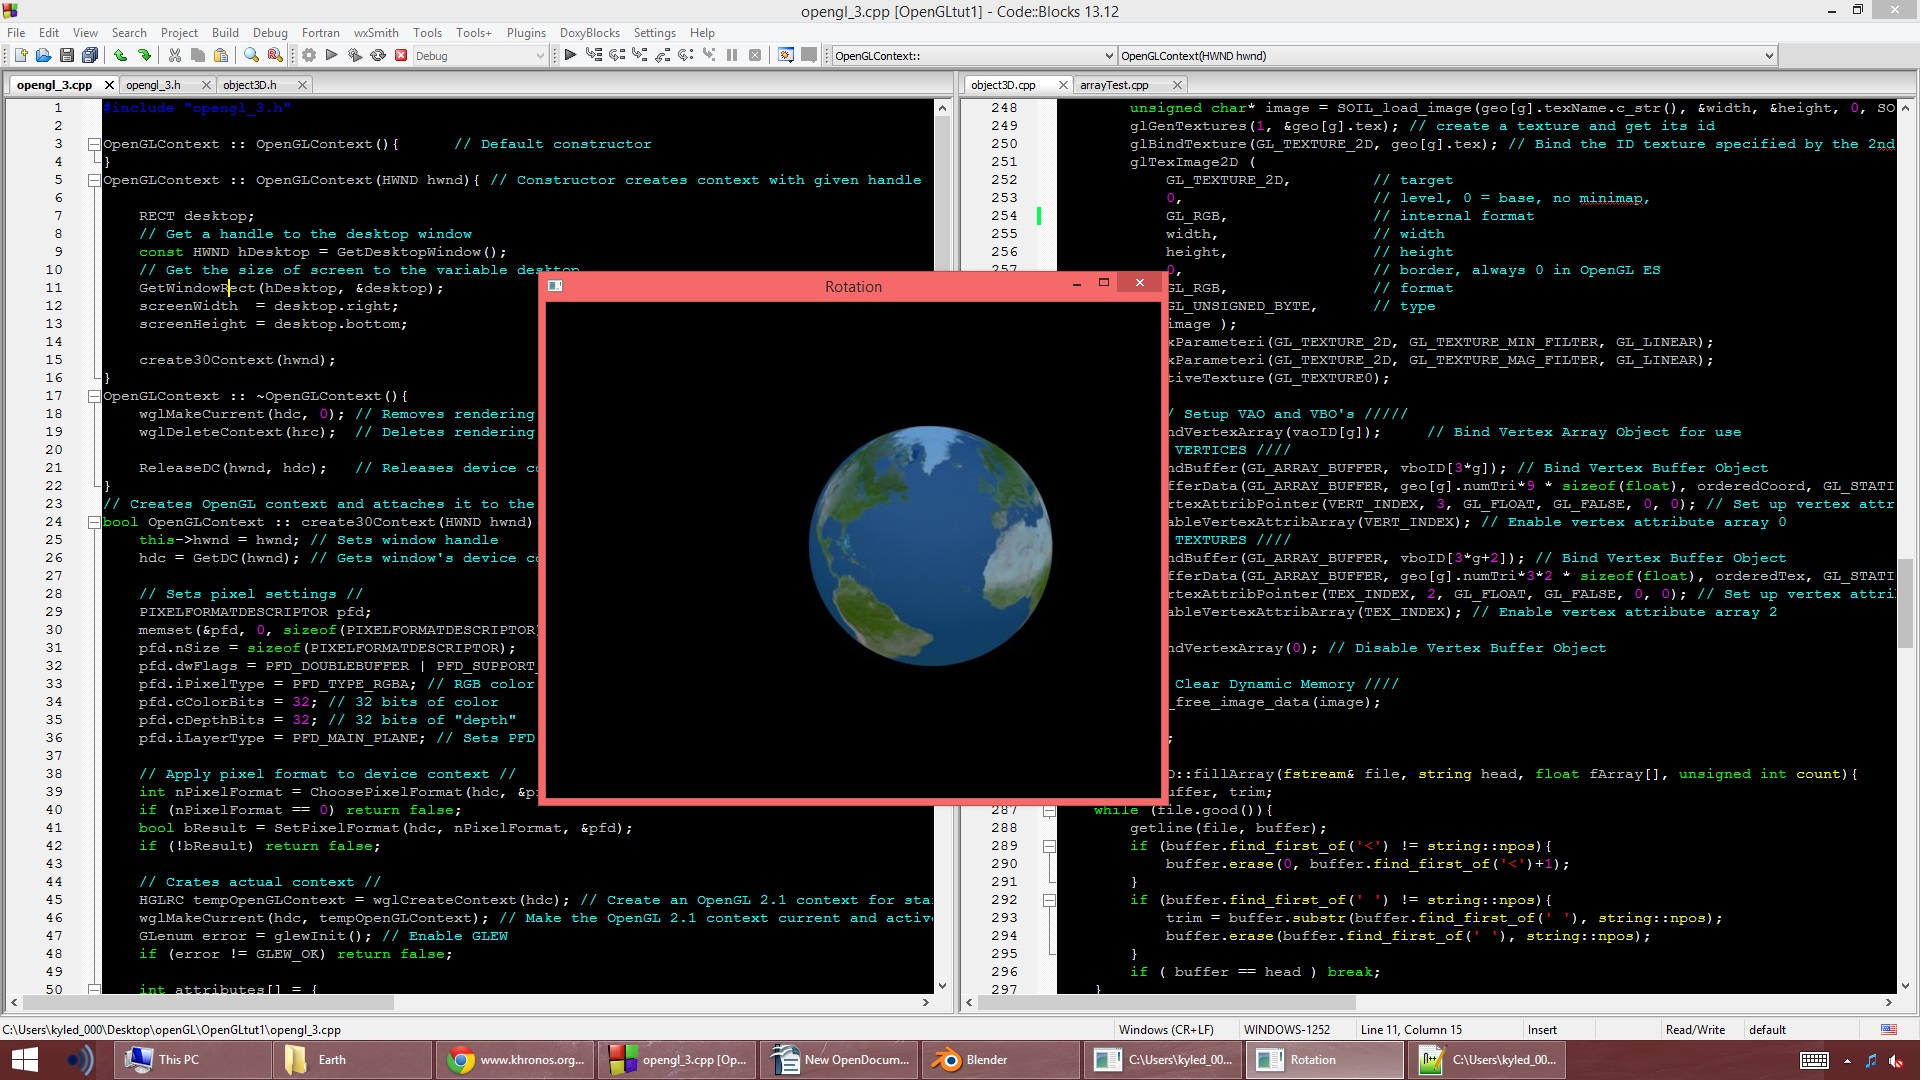 Computer code and graphic model of the earth